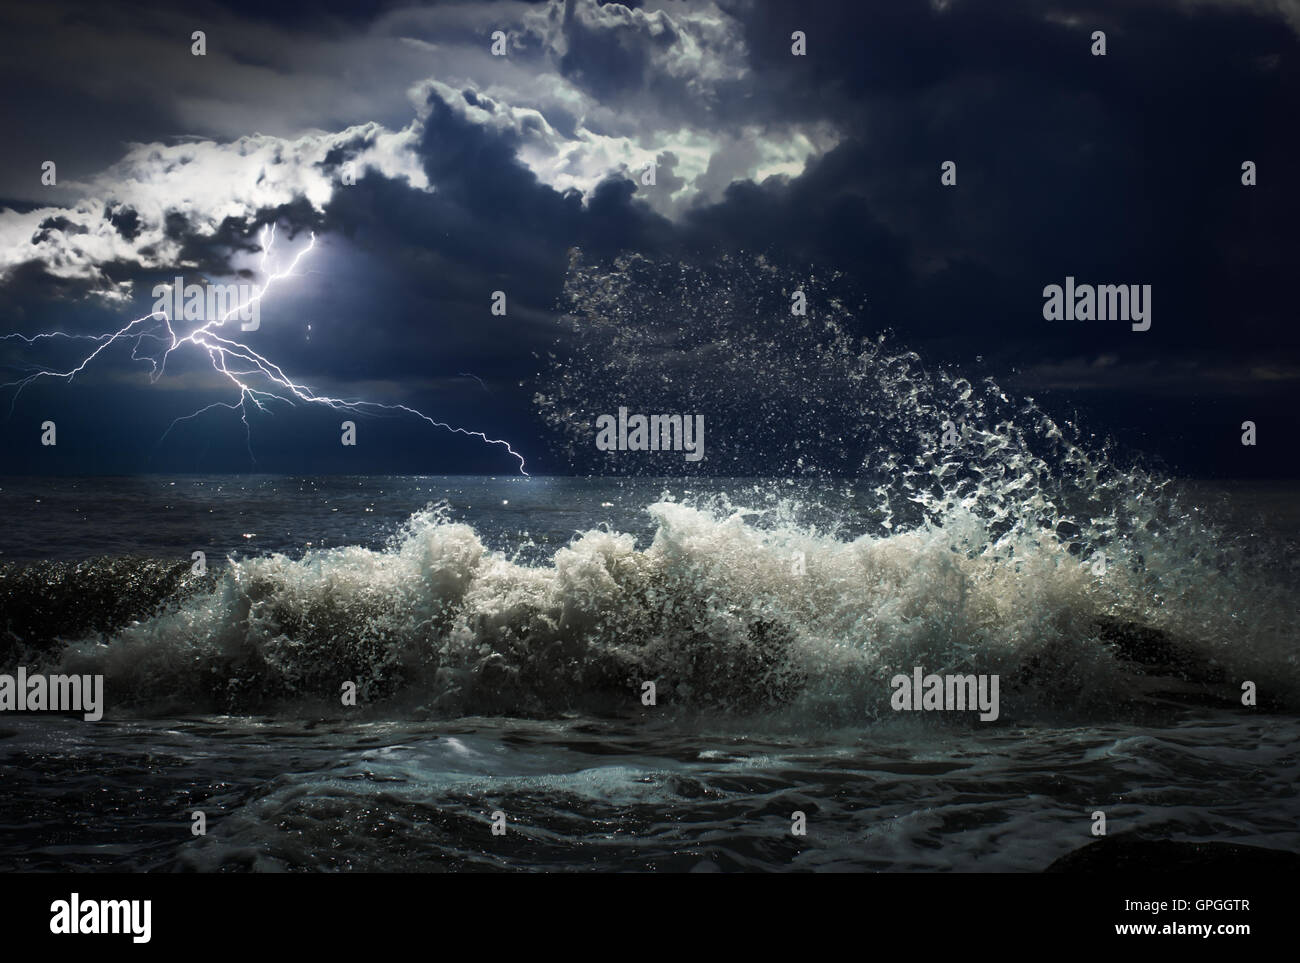 dark ocean storm with lgihting and waves at night Stock Photo